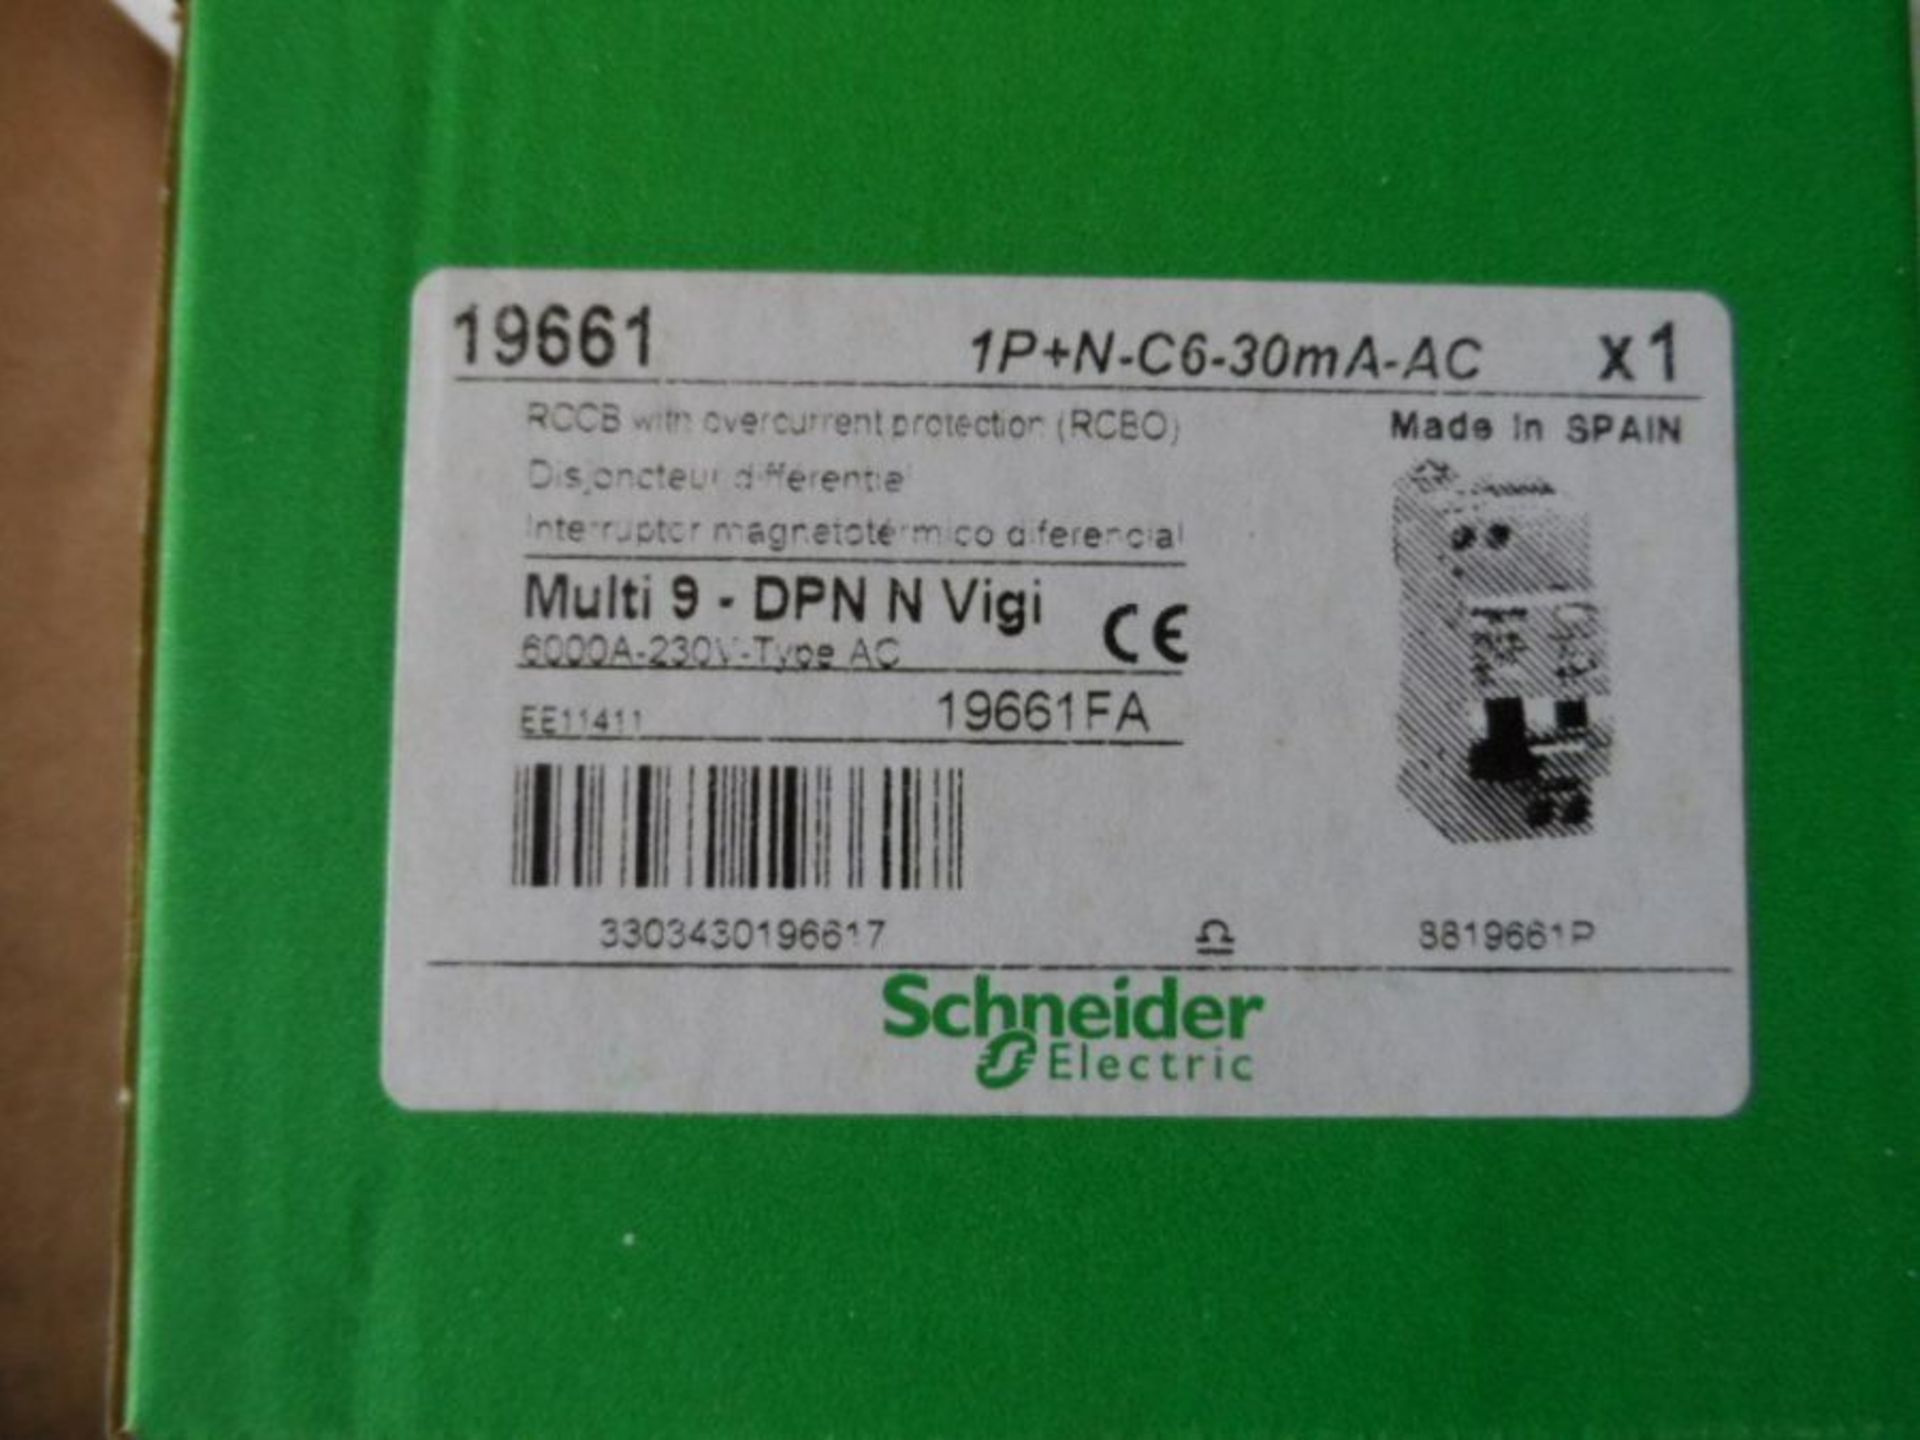 20 x Schneider 1+N Pole Type C RCBO Circuit Breaker Overload Protection 6A 2450075 - Image 4 of 4